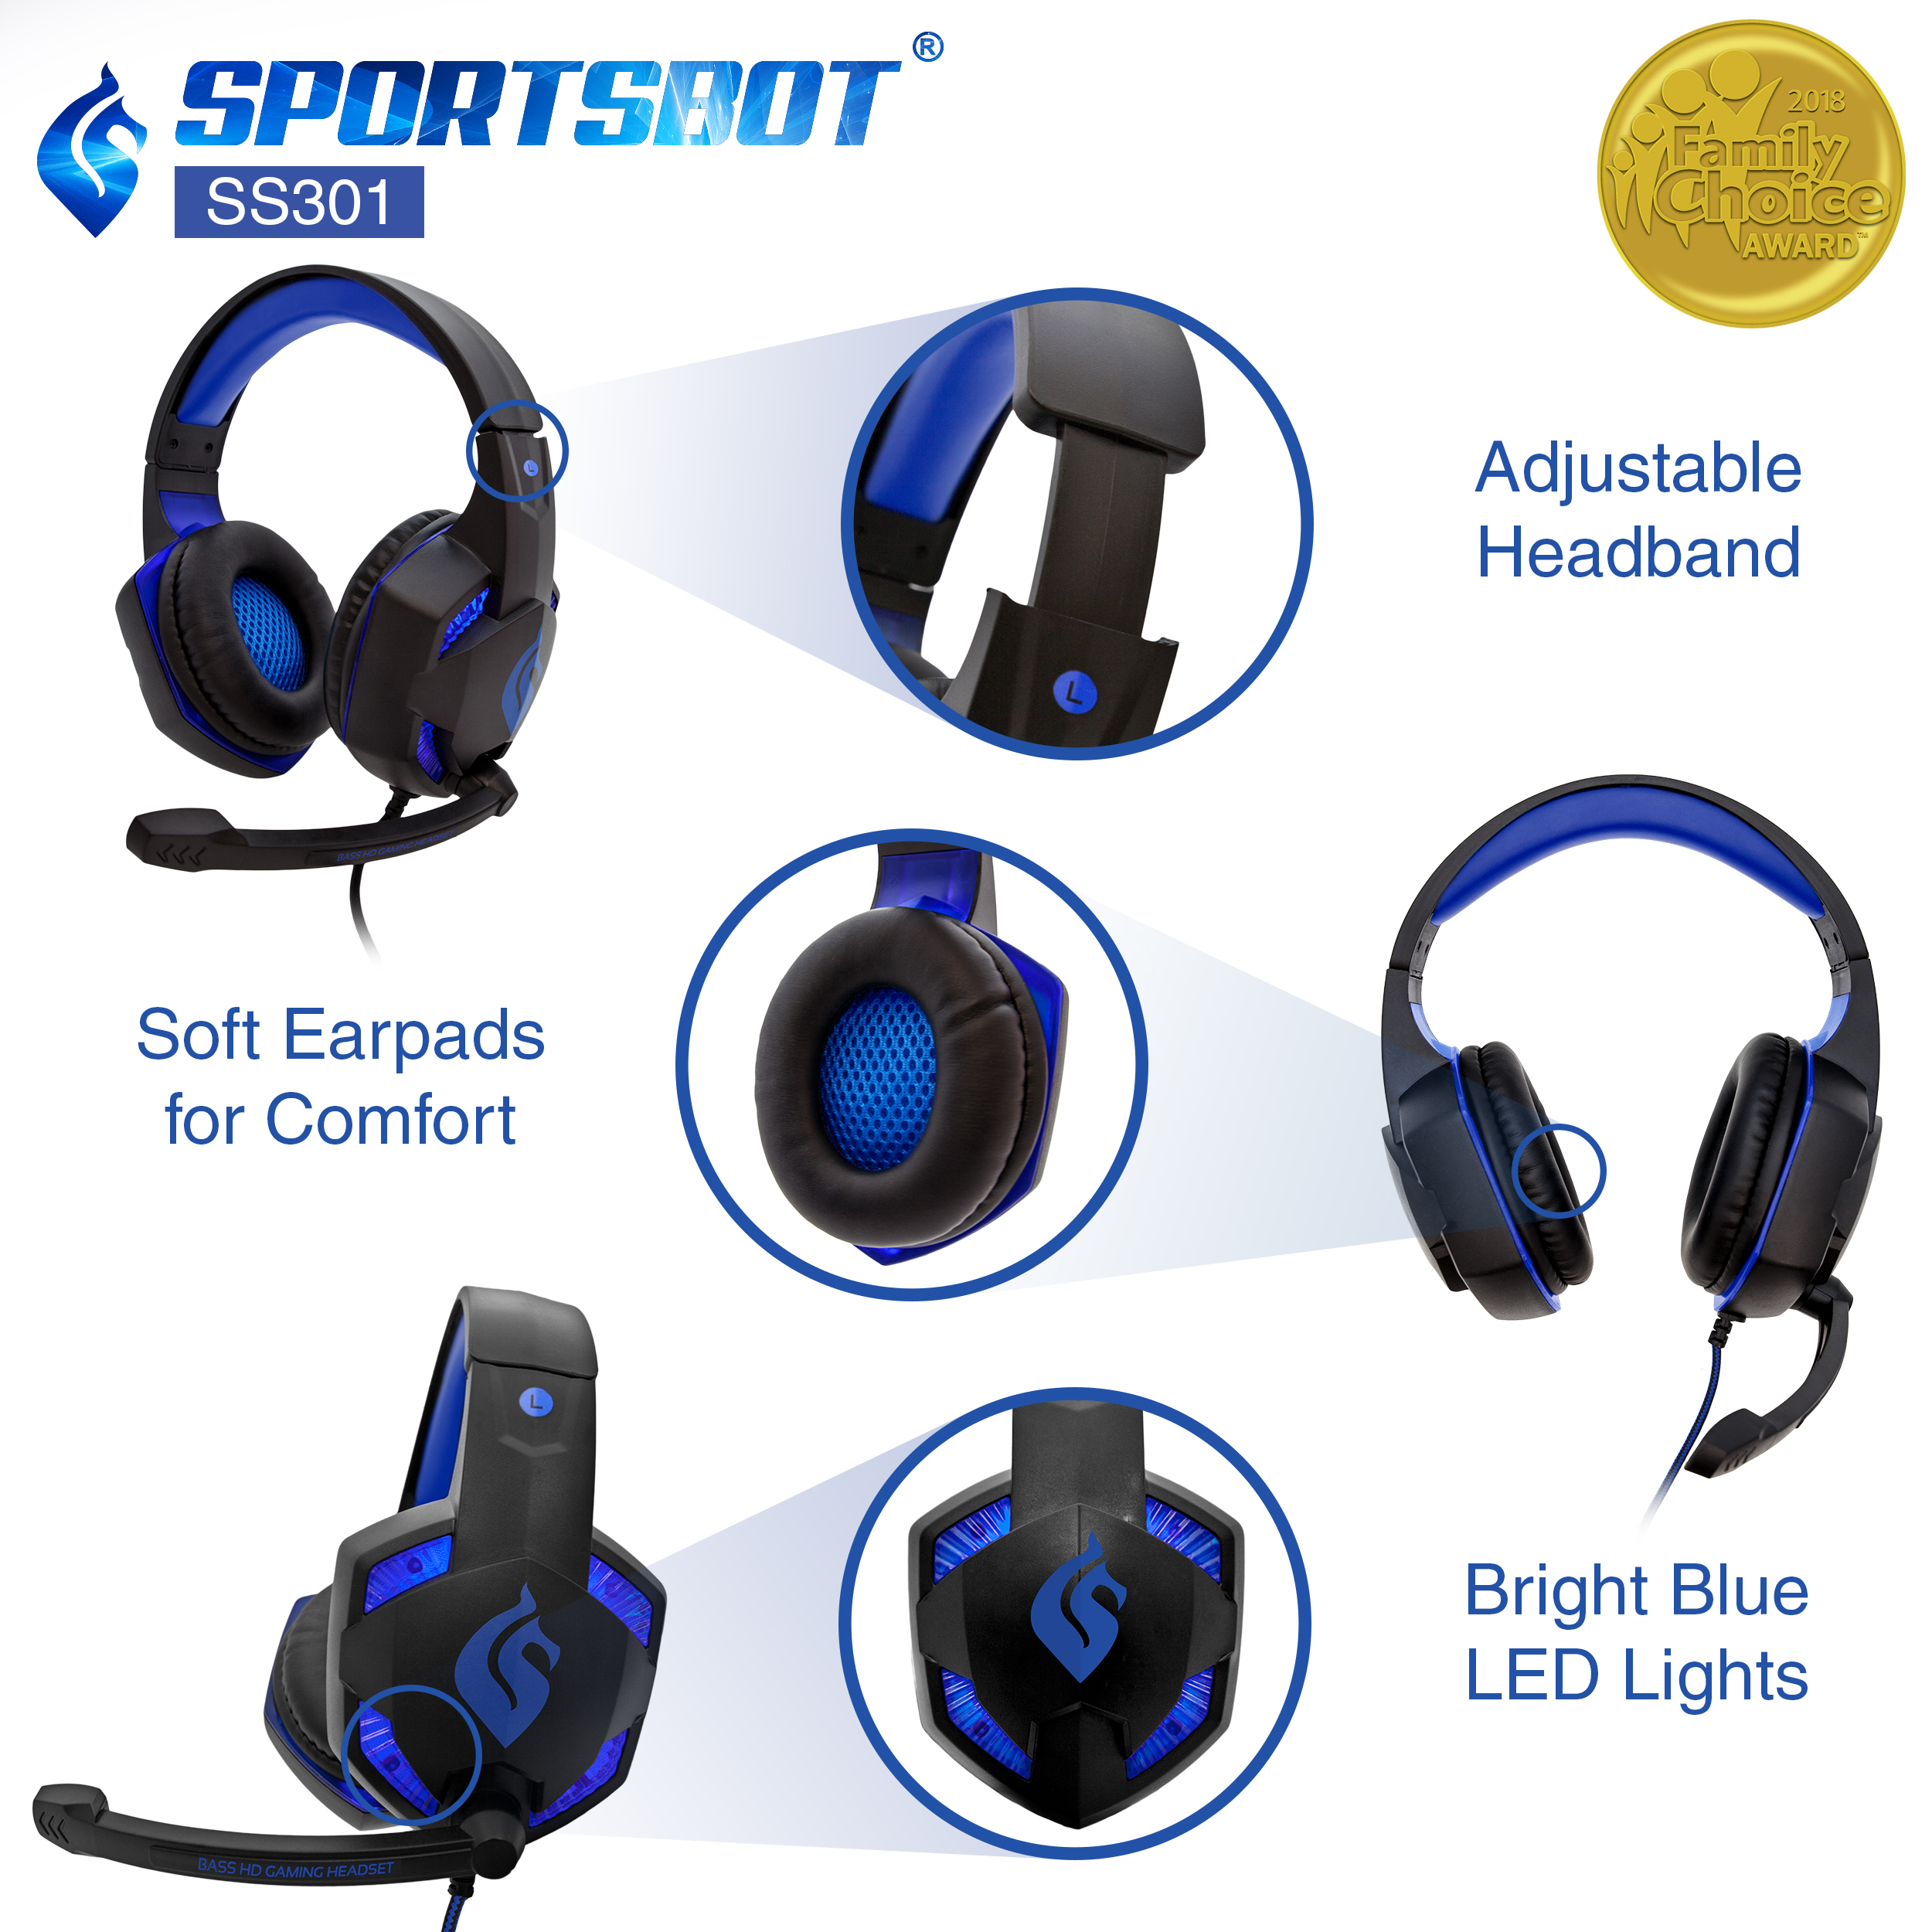 Sportsbot SS301 Blue LED Gaming Over-Ear Headset, Keyboard & Mouse Combo Set - image 4 of 10